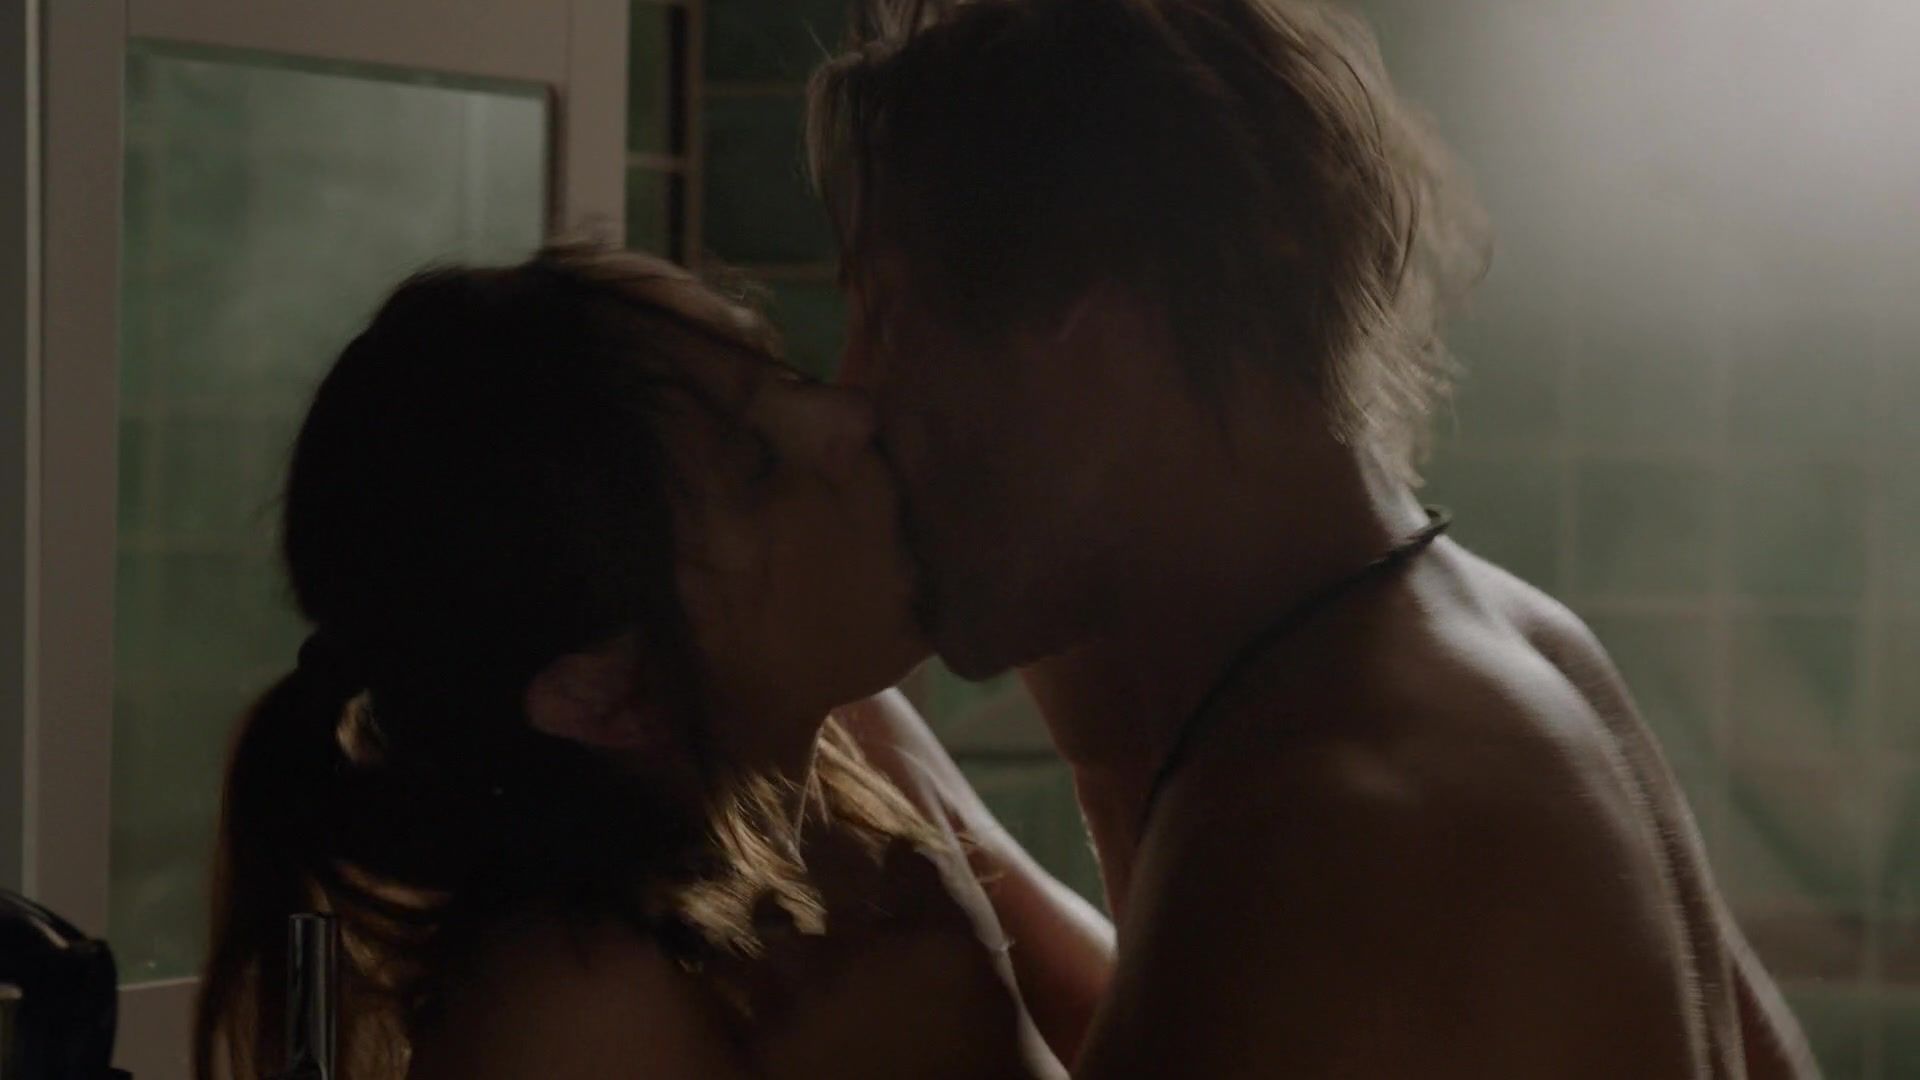 Analsex Naked Sarah Wayne Callies in Sex Scene from the TV show "Colony" s01e03 (2016) Dicks